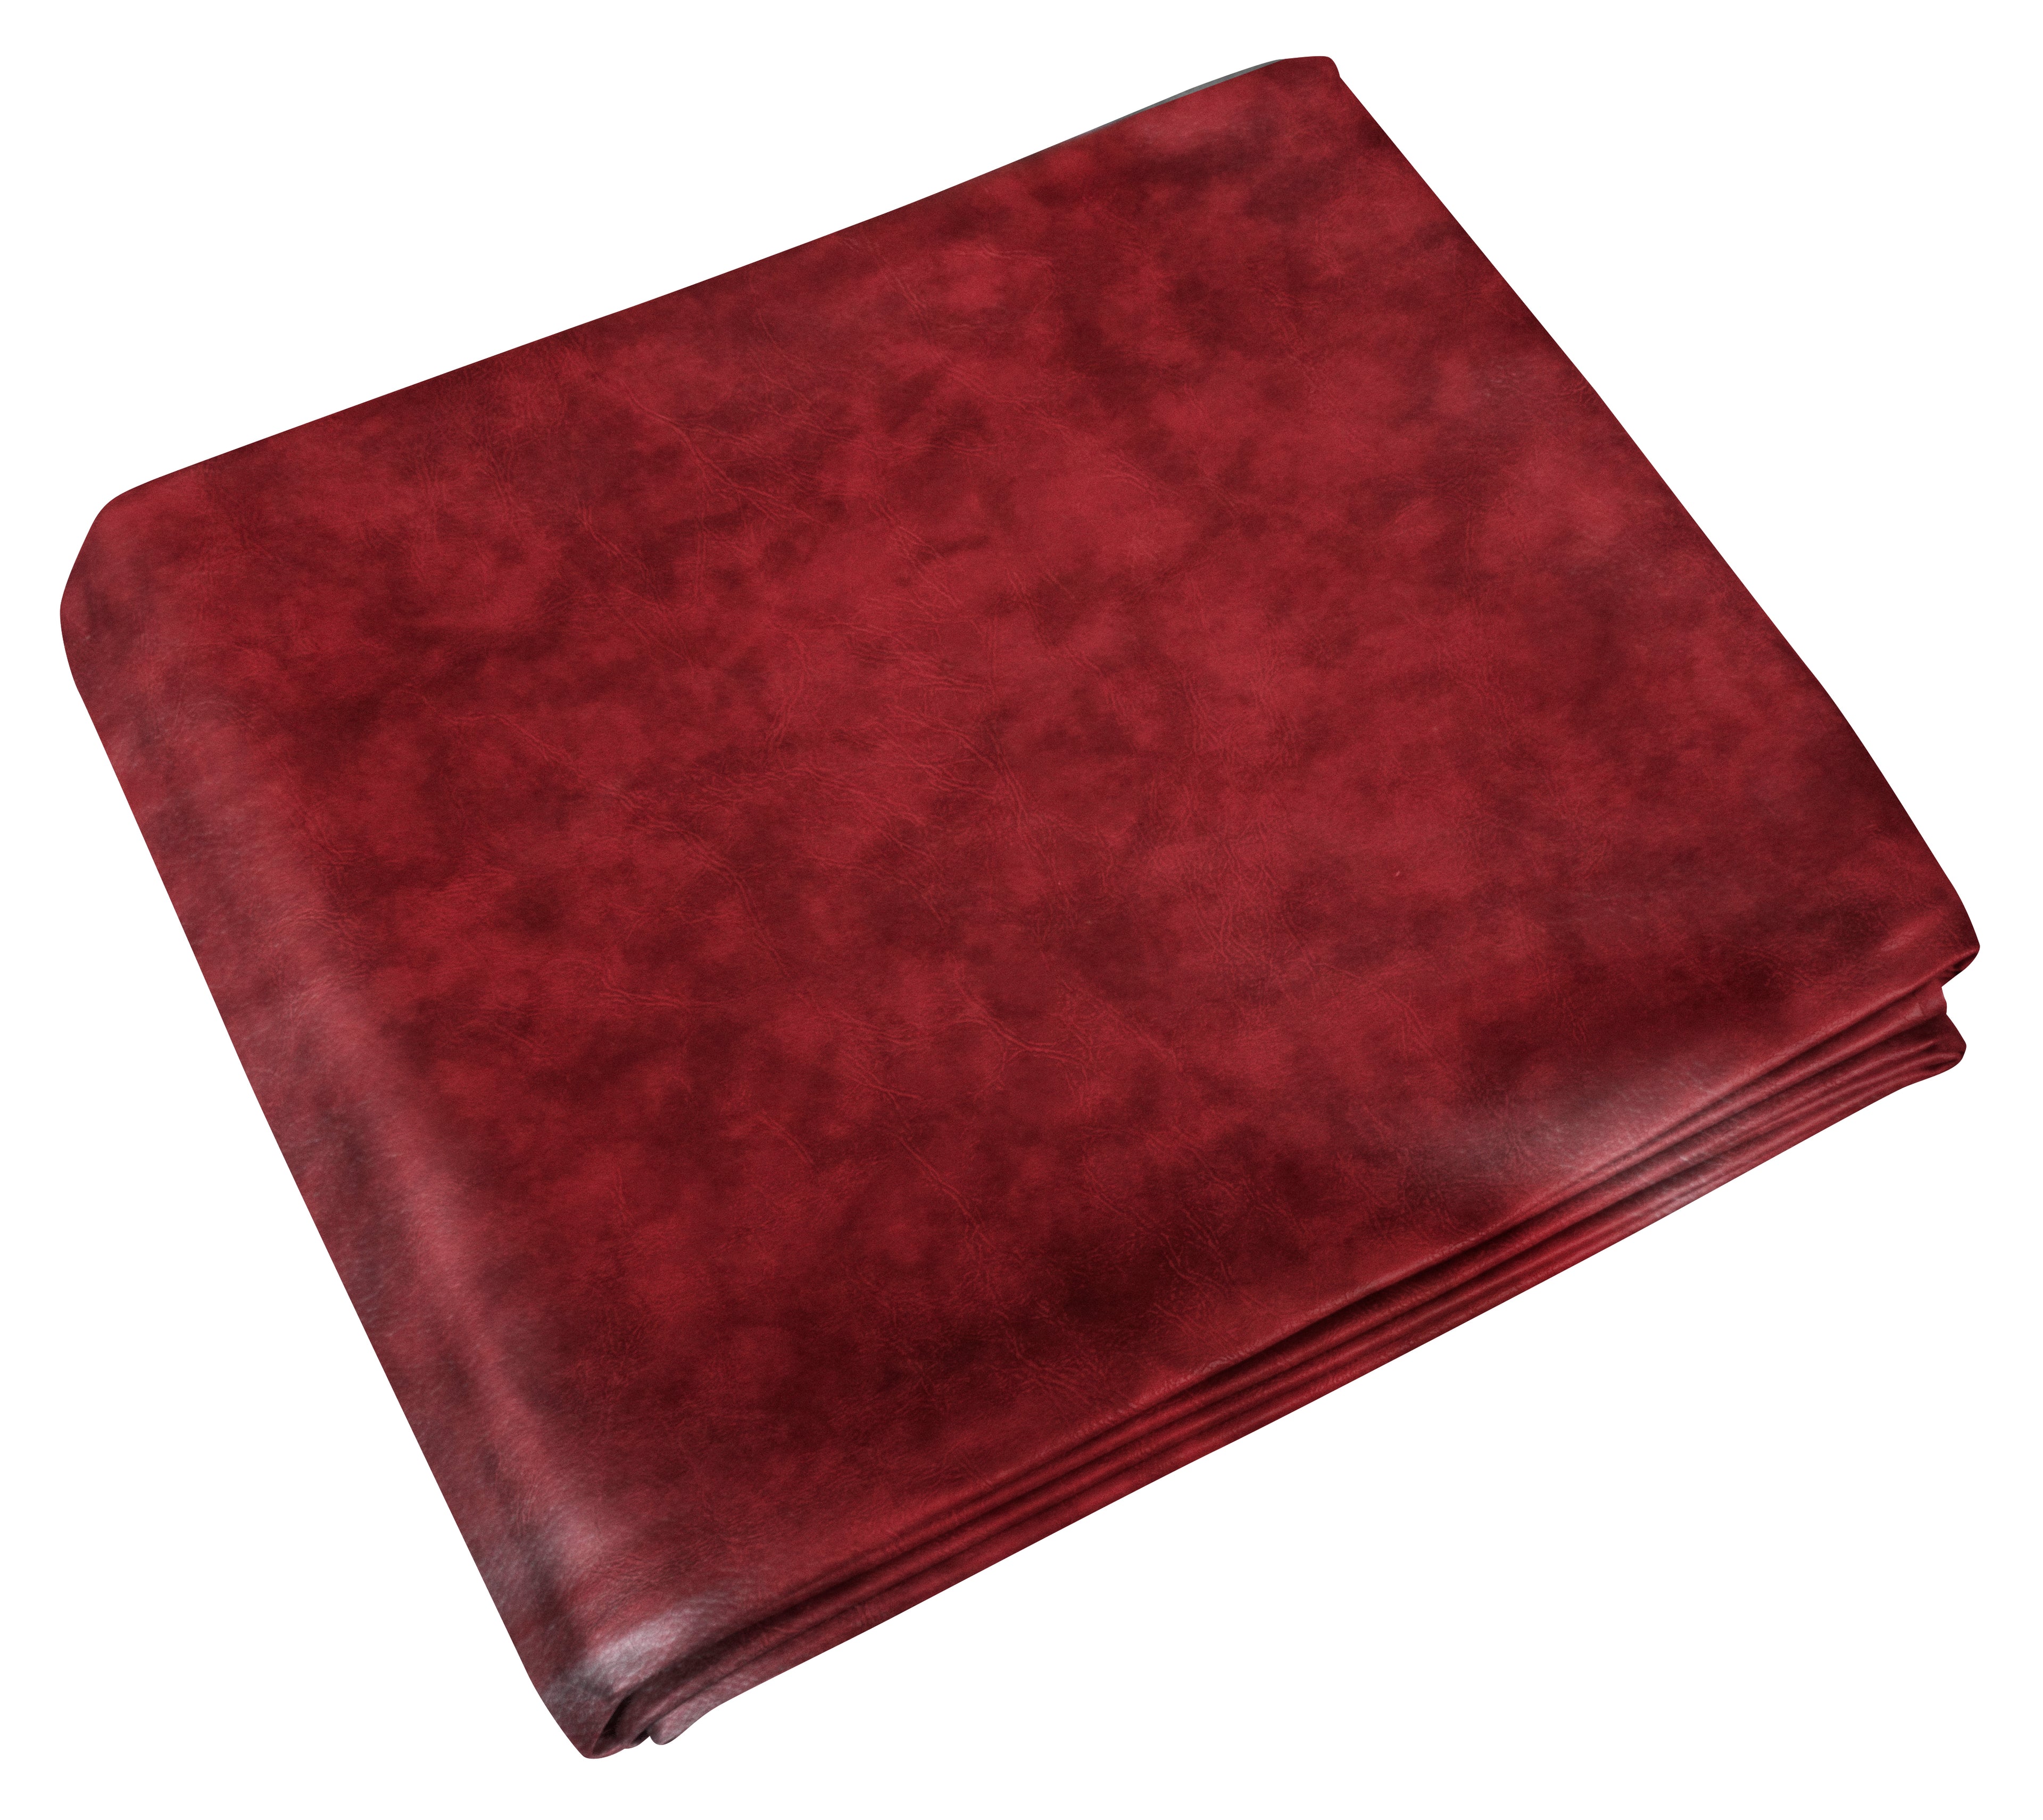 Legacy Billiards Draped Pool Table Cover Folded in Oxblood